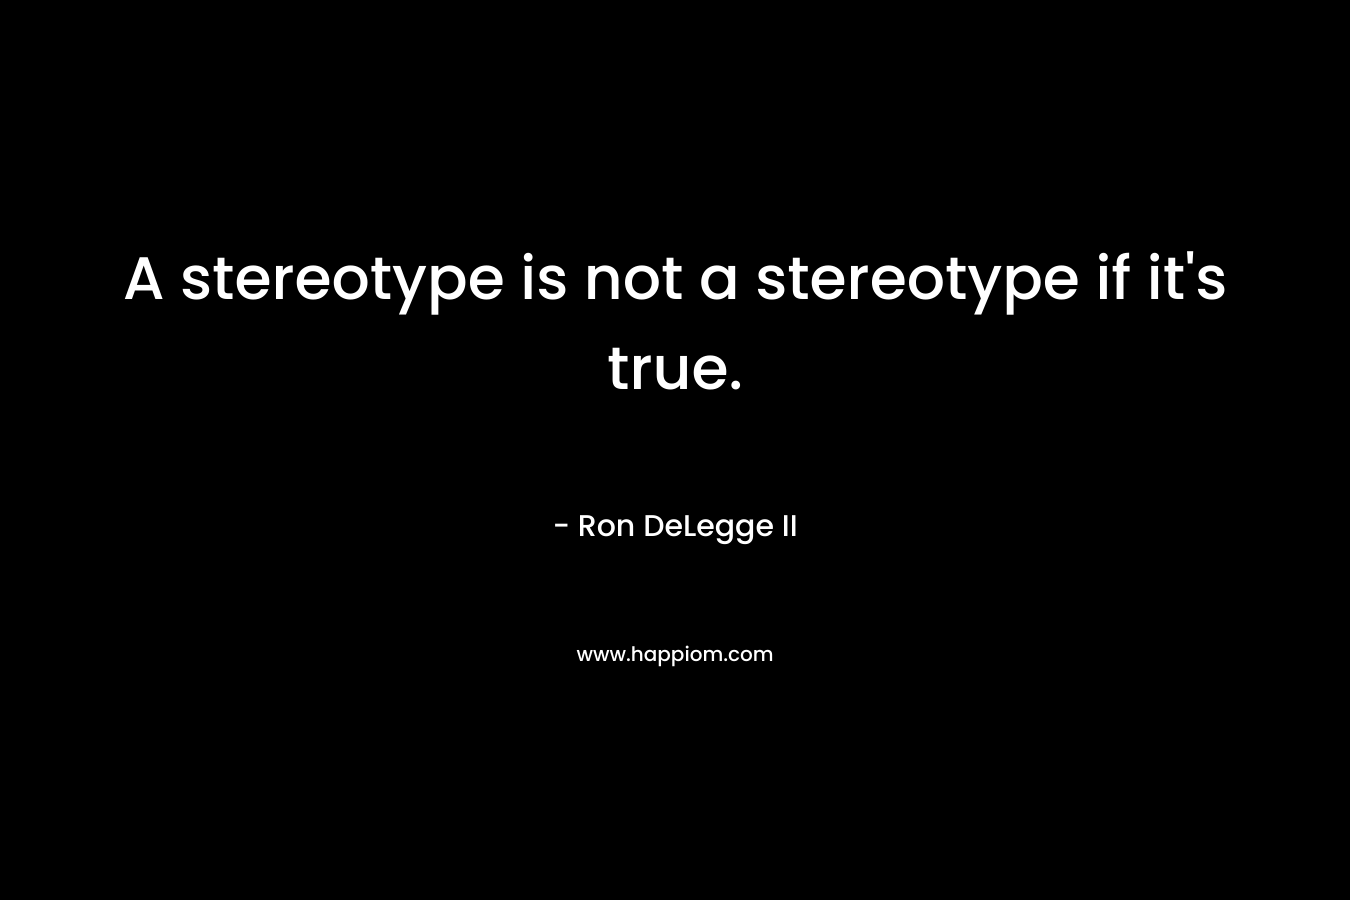 A stereotype is not a stereotype if it's true.